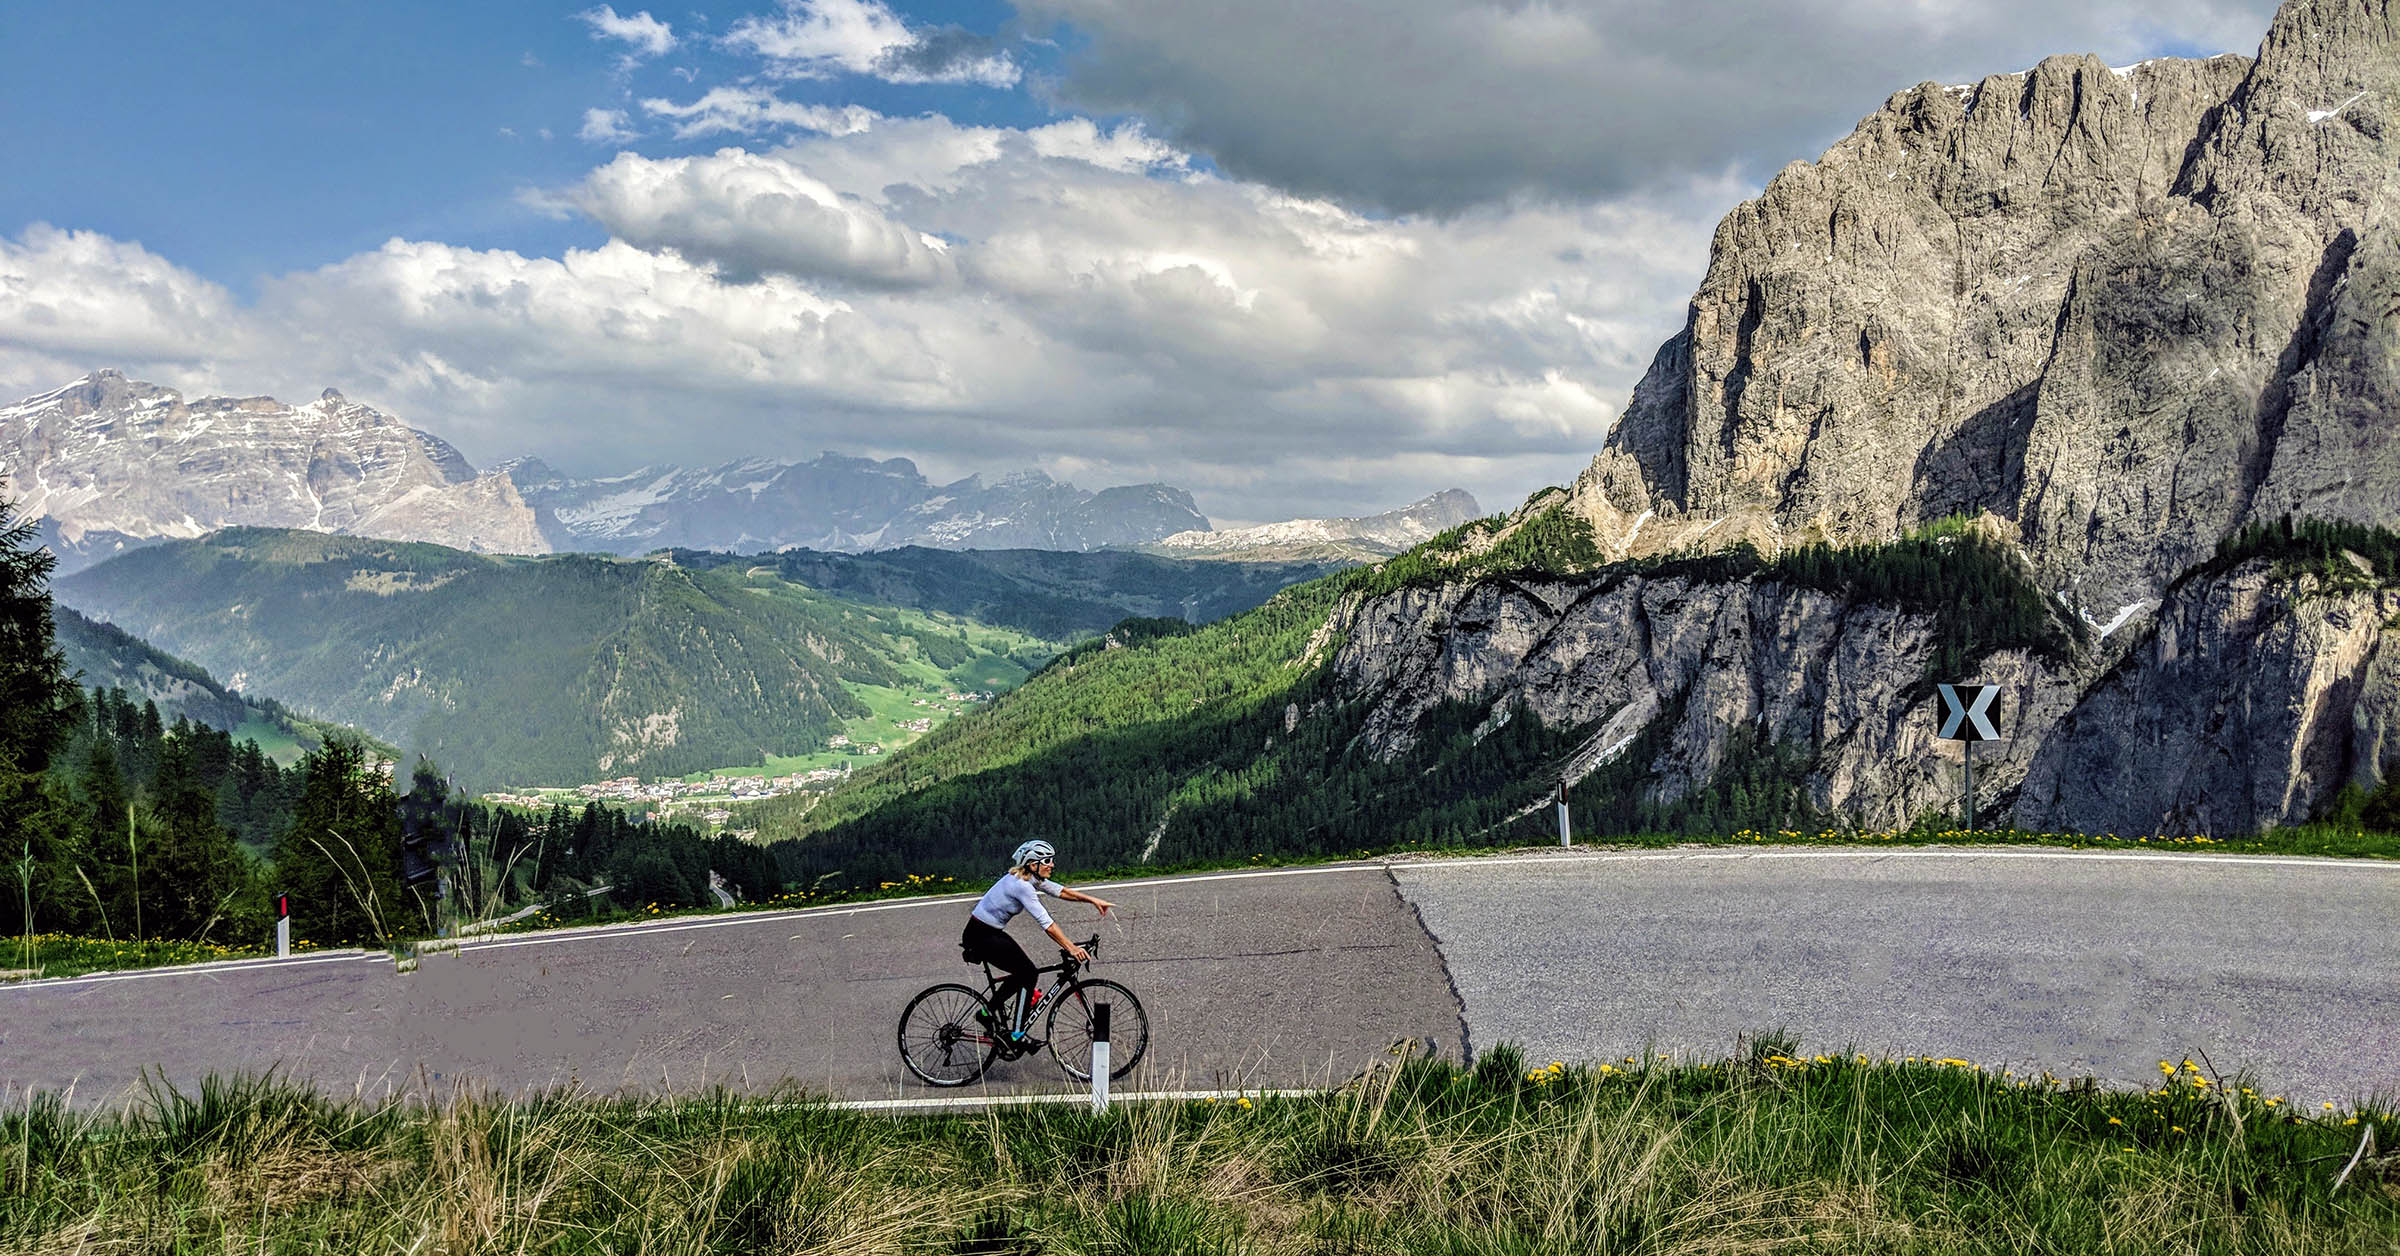 Dolomites bike trip - Cycling Vacation in Italy